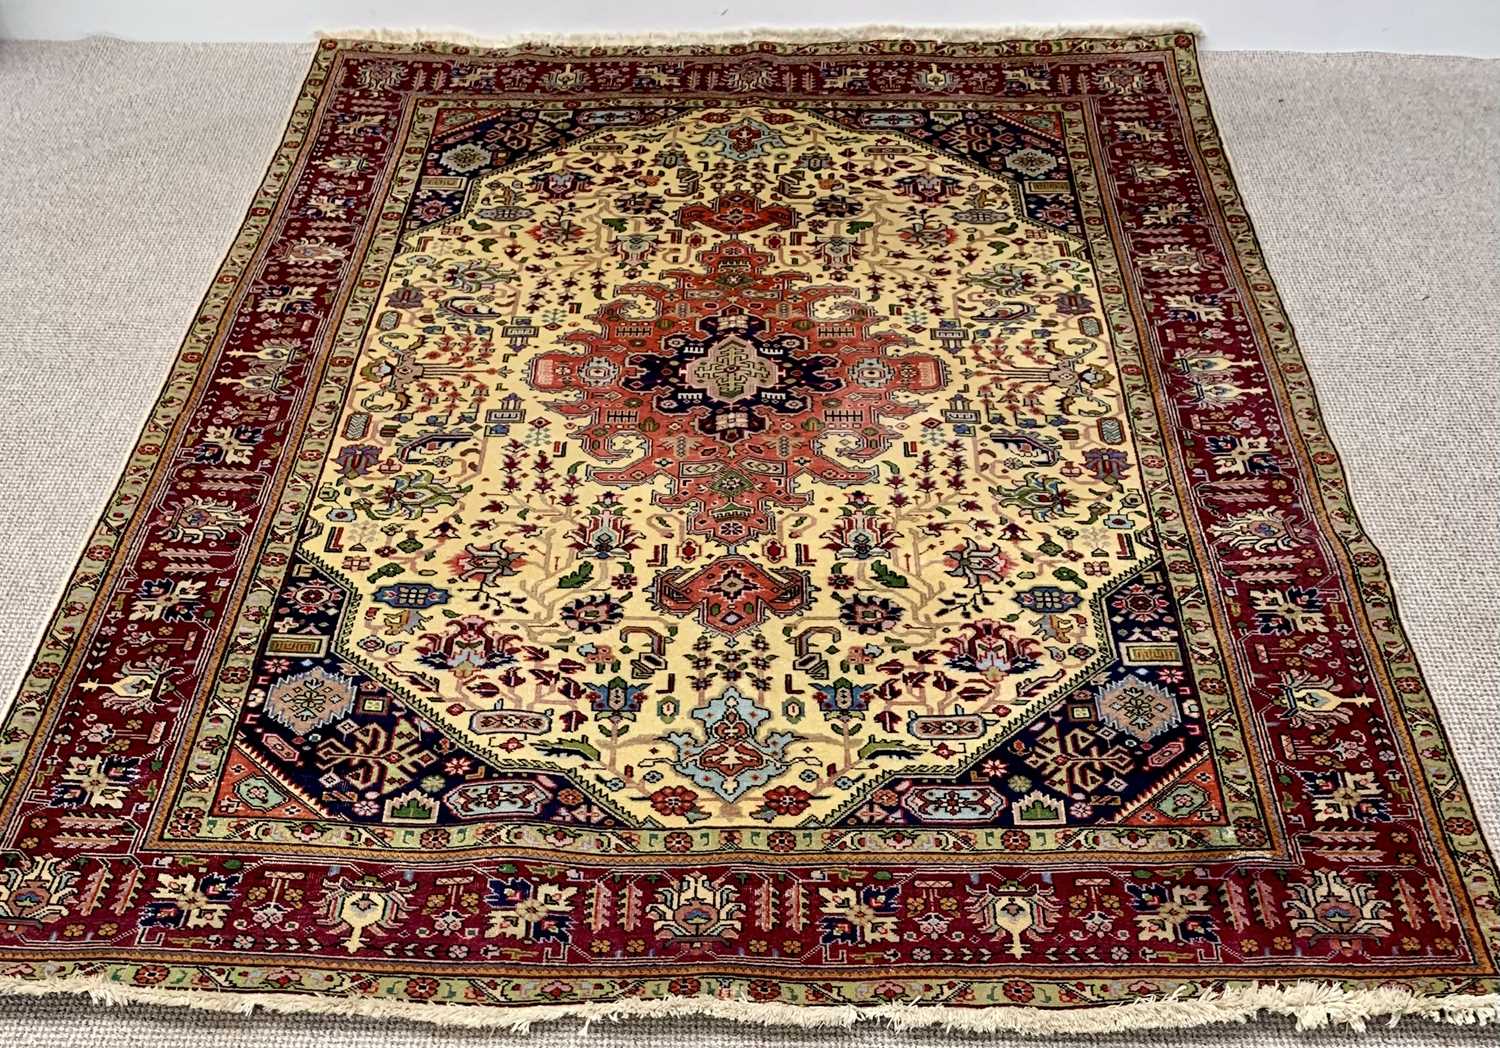 LARGE EASTERN STYLE RUG - multiple bordered with tasselled ends, traditional central motif and